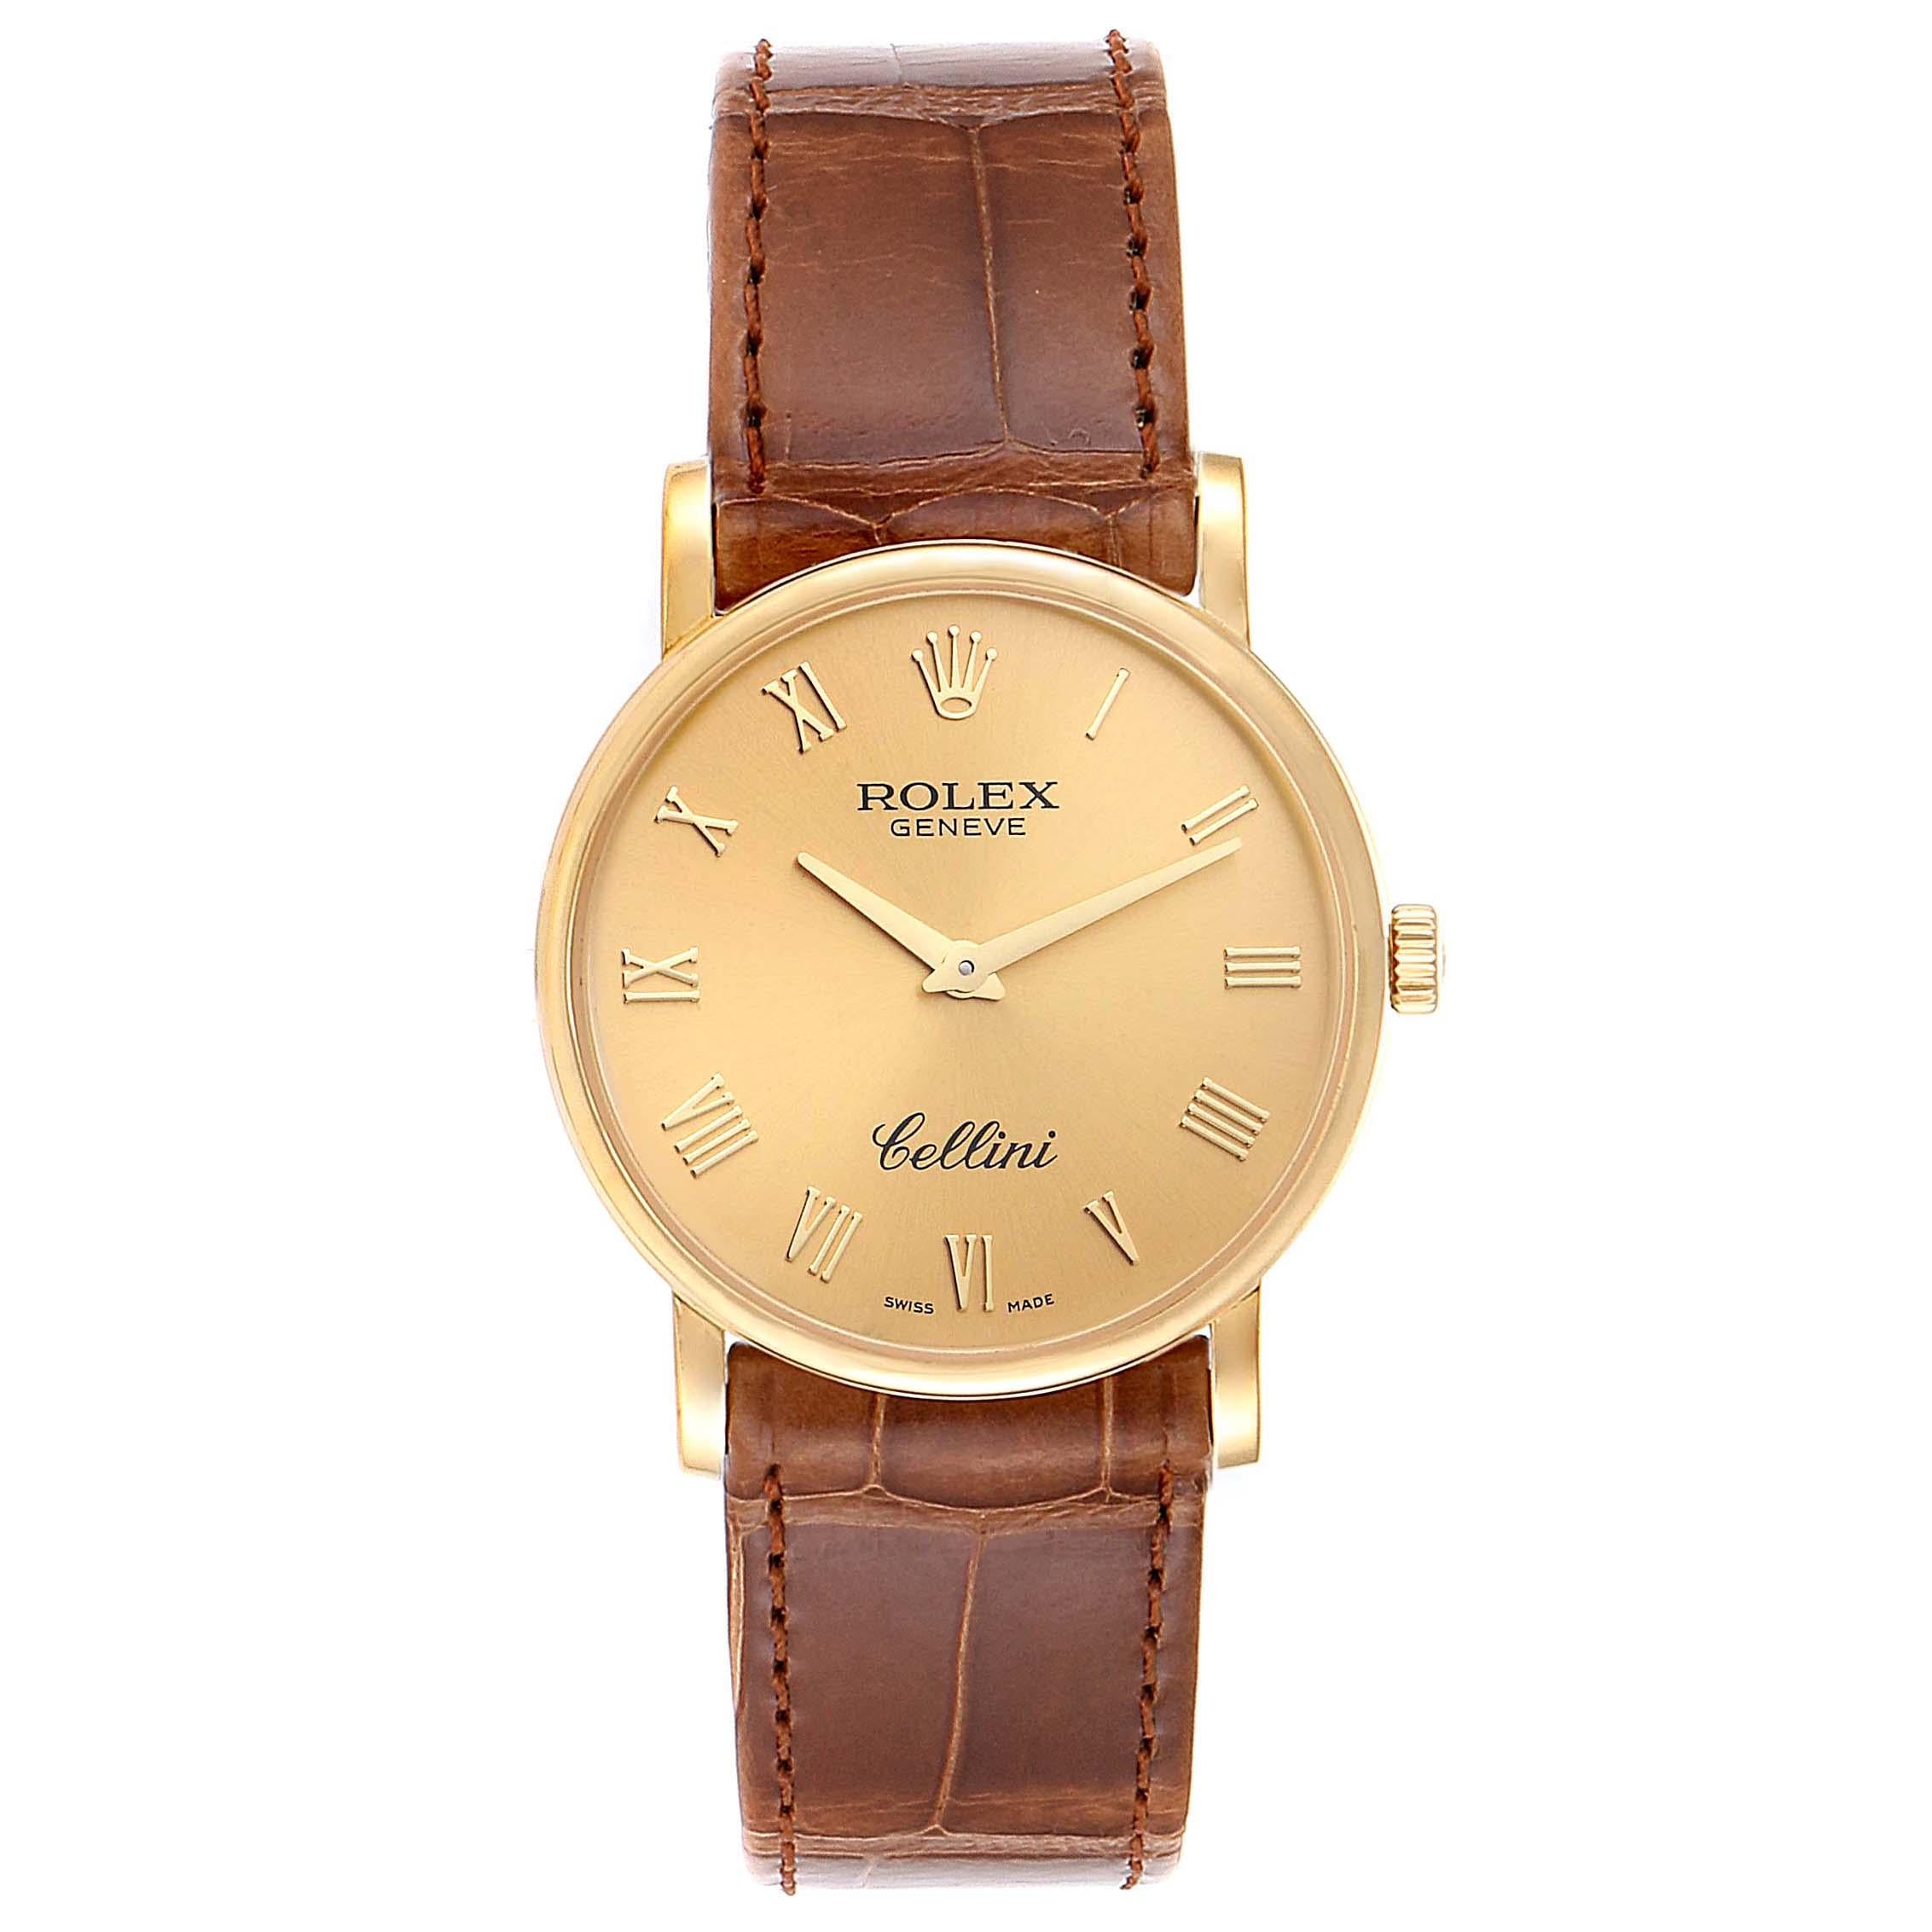 Rolex Cellini Classic 32mm Yellow Gold Brown Strap Mens Watch 5115. Manual winding movement. 18K yellow gold slim case 31.8 x 5.5 mm in diameter. Rolex logo on a crown. . Scratch resistant sapphire crystal. Flat profile. Champagne dial with raised